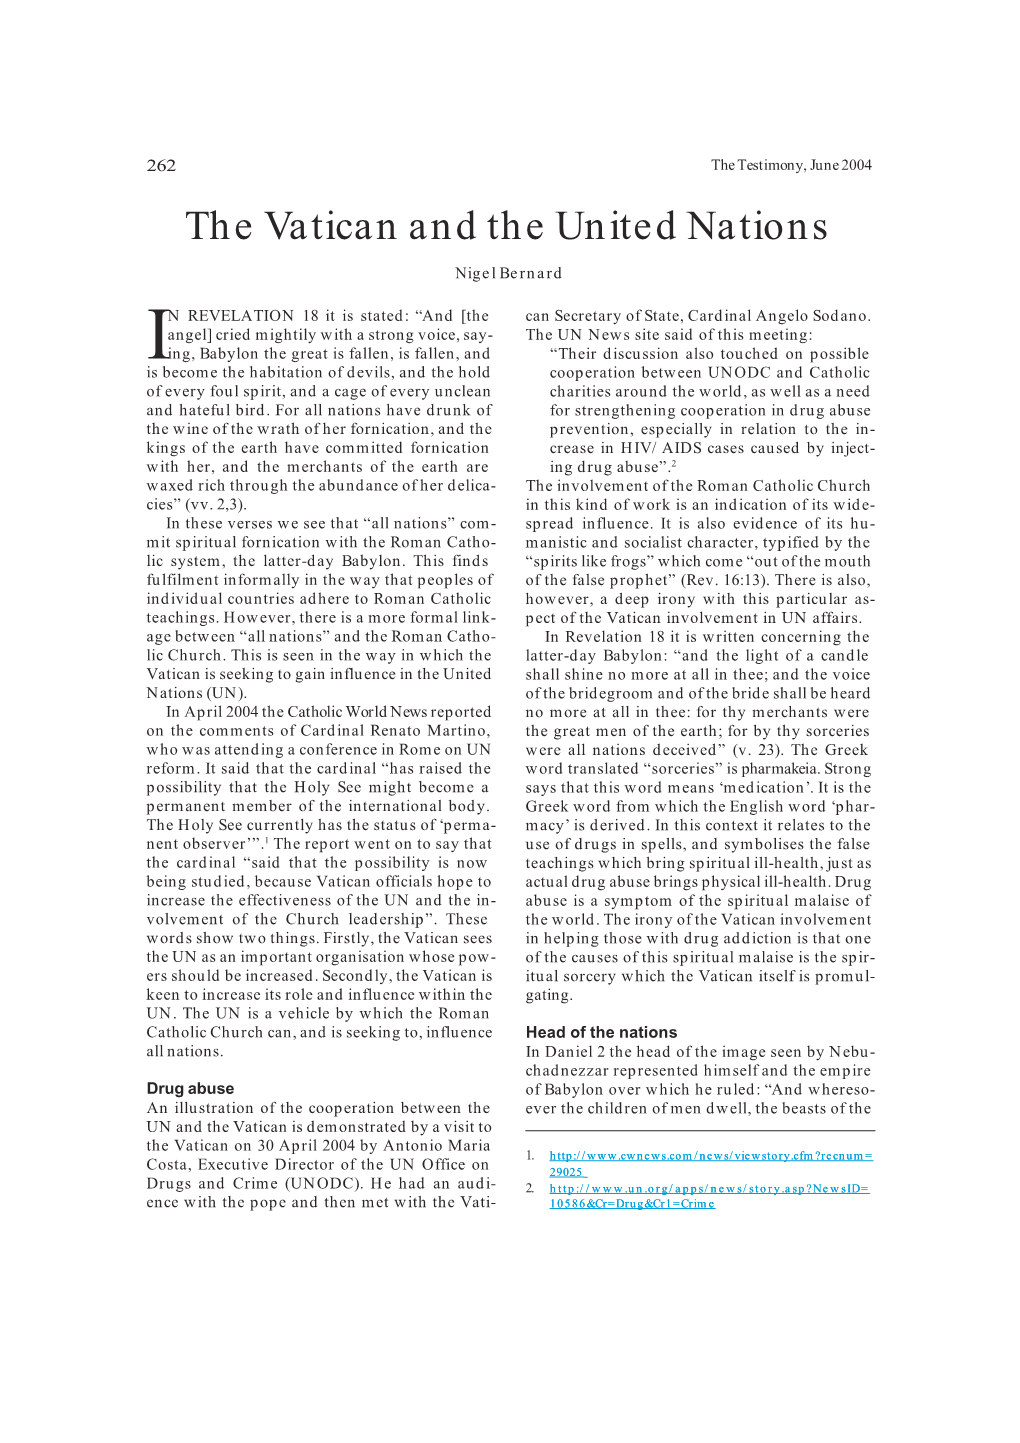 The Vatican and the United Nations